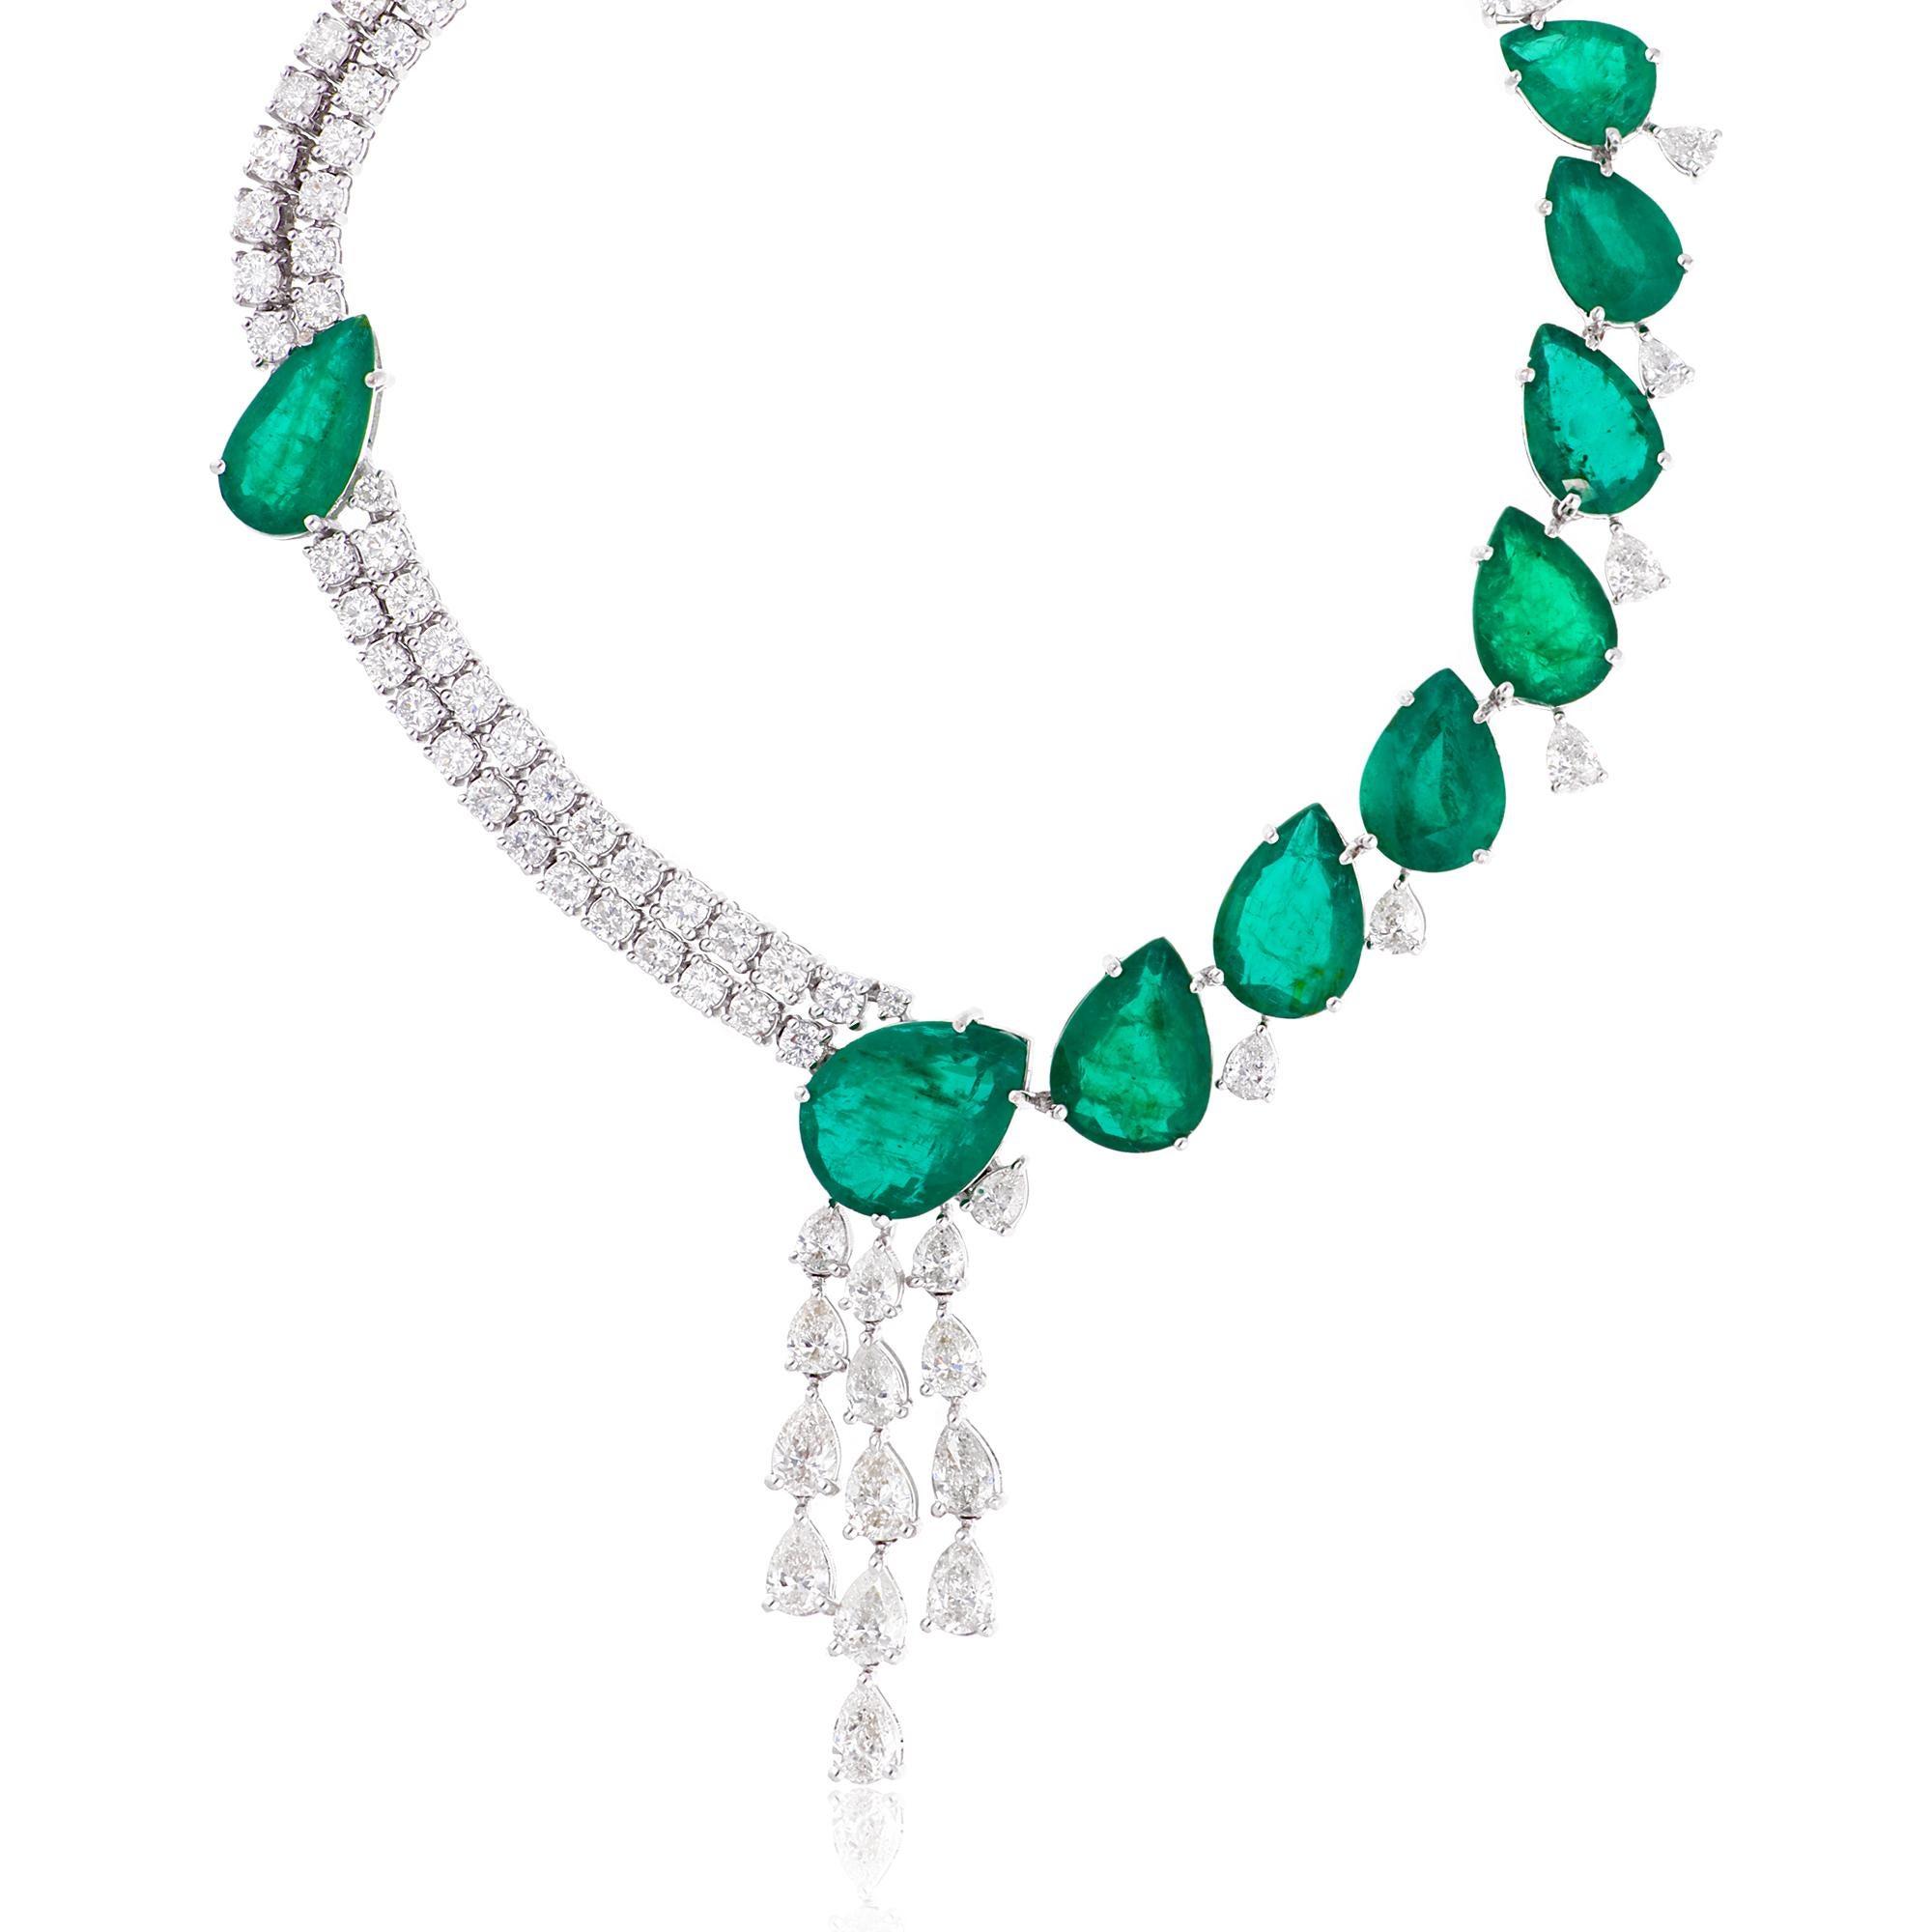 Elevate your style with the timeless elegance of this Pear Shape Emerald Gemstone Necklace. Meticulously crafted in 18-karat white gold, this exquisite piece of fine jewelry features a captivating pear-shaped emerald pendant adorned with shimmering